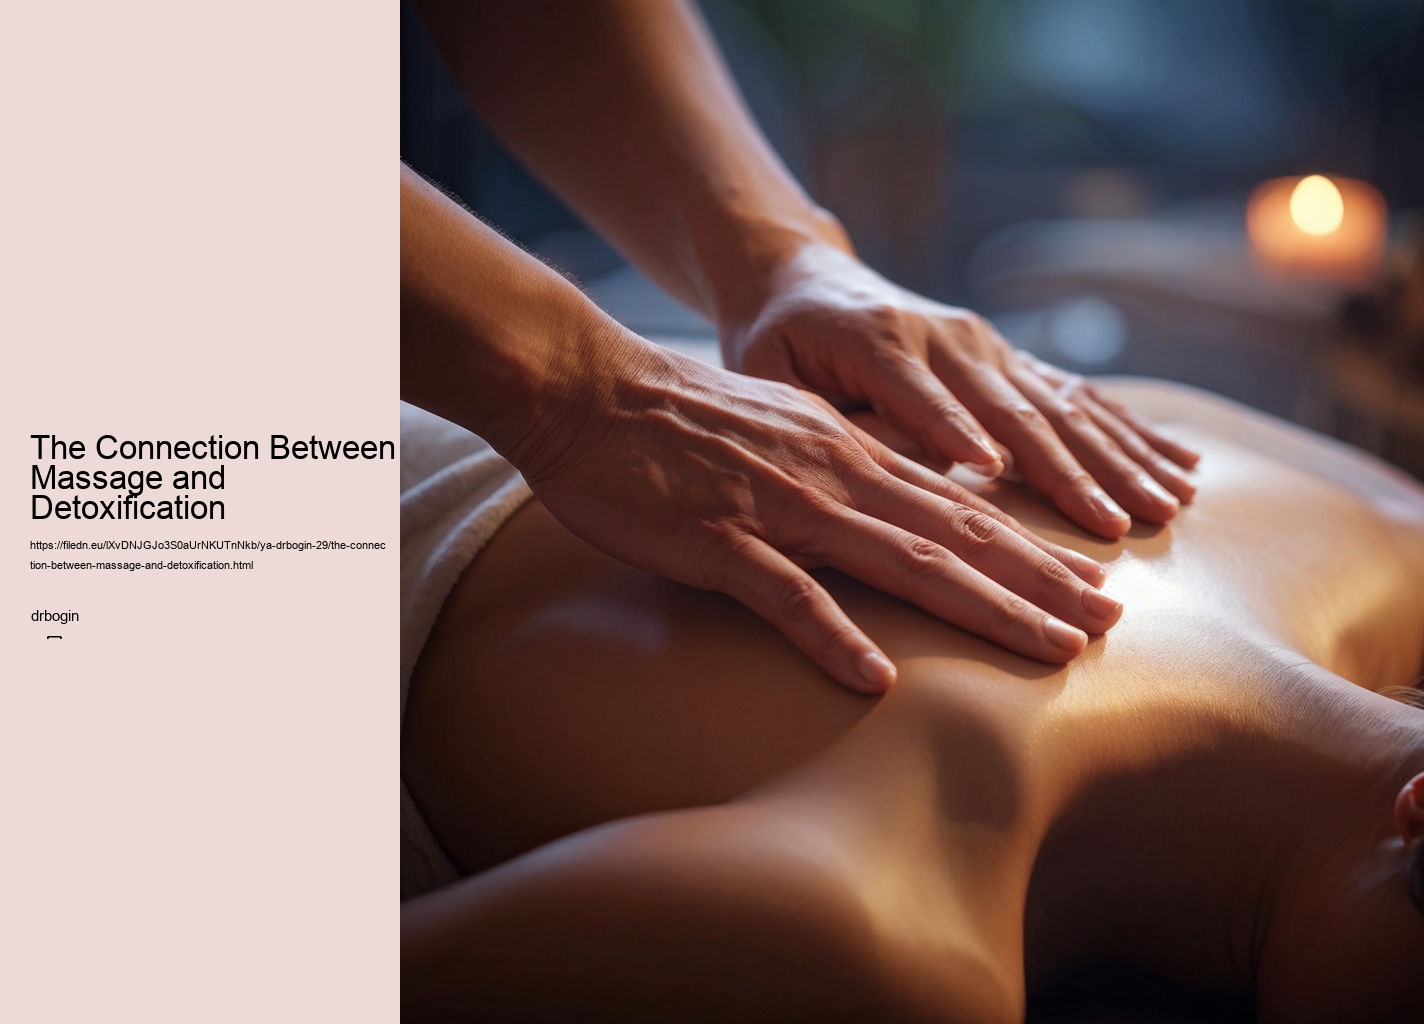 The Connection Between Massage and Detoxification